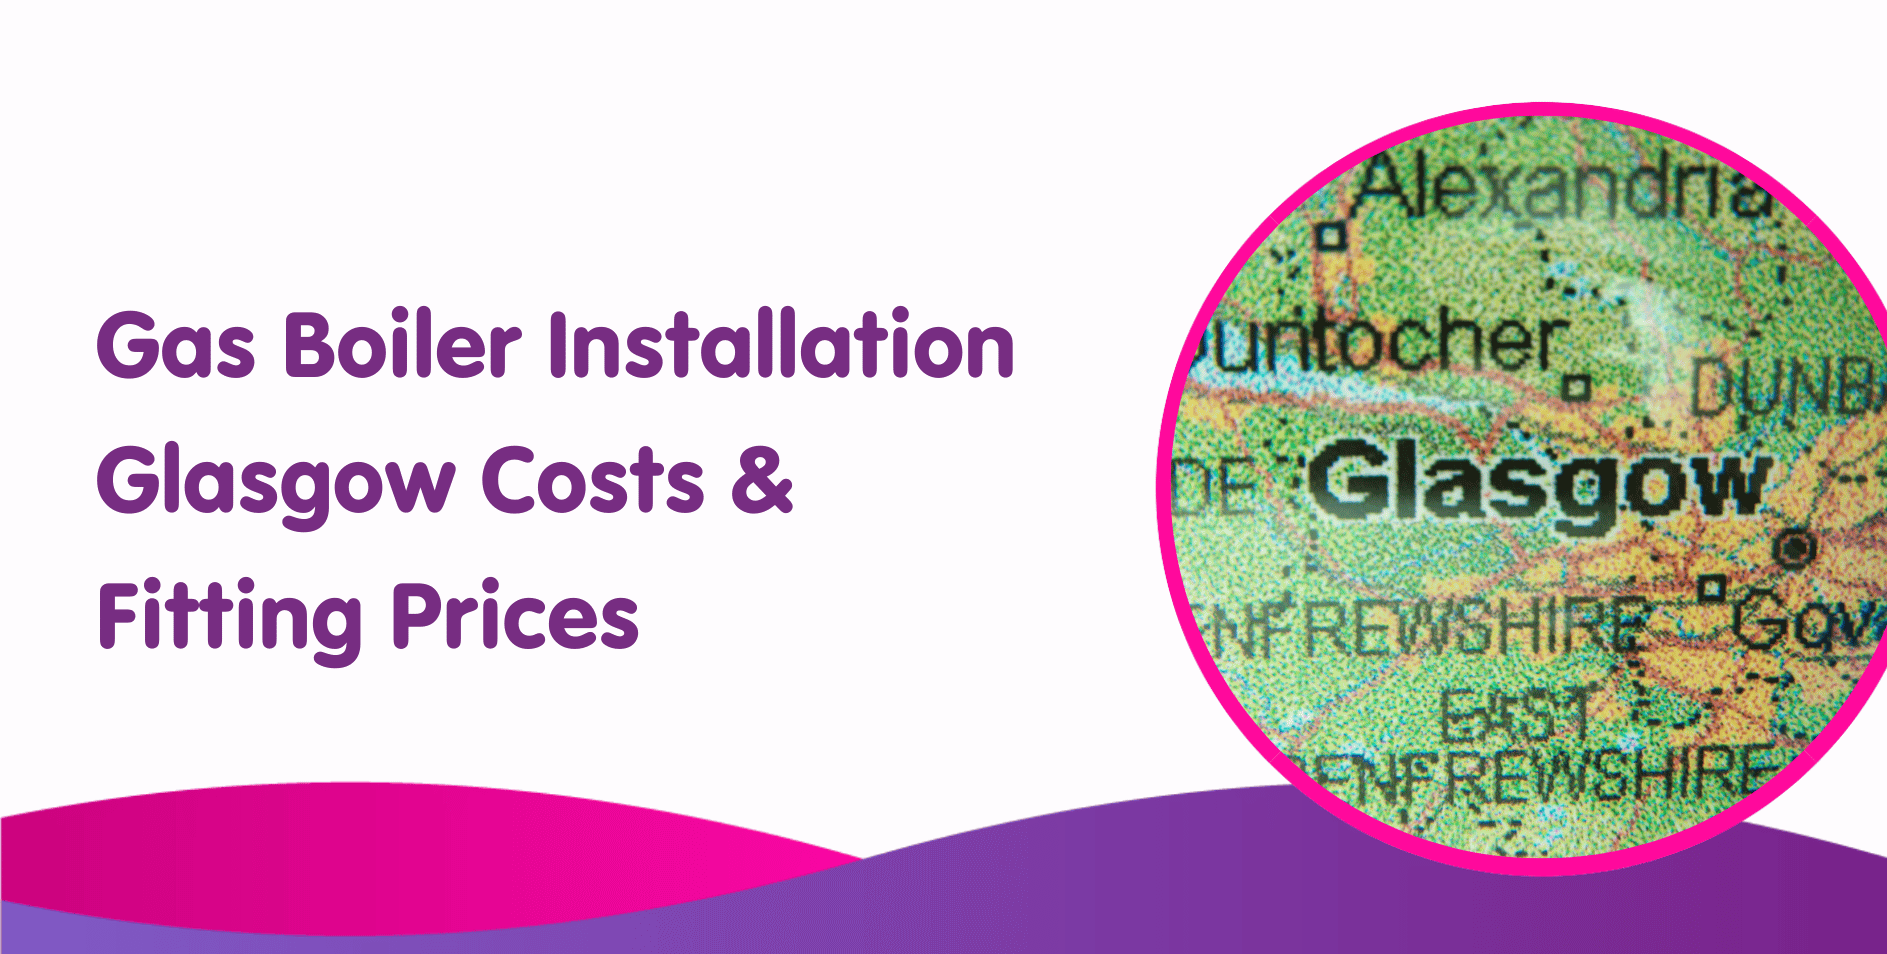 Gas Boiler Installation Glasgow Costs & Fitting Prices